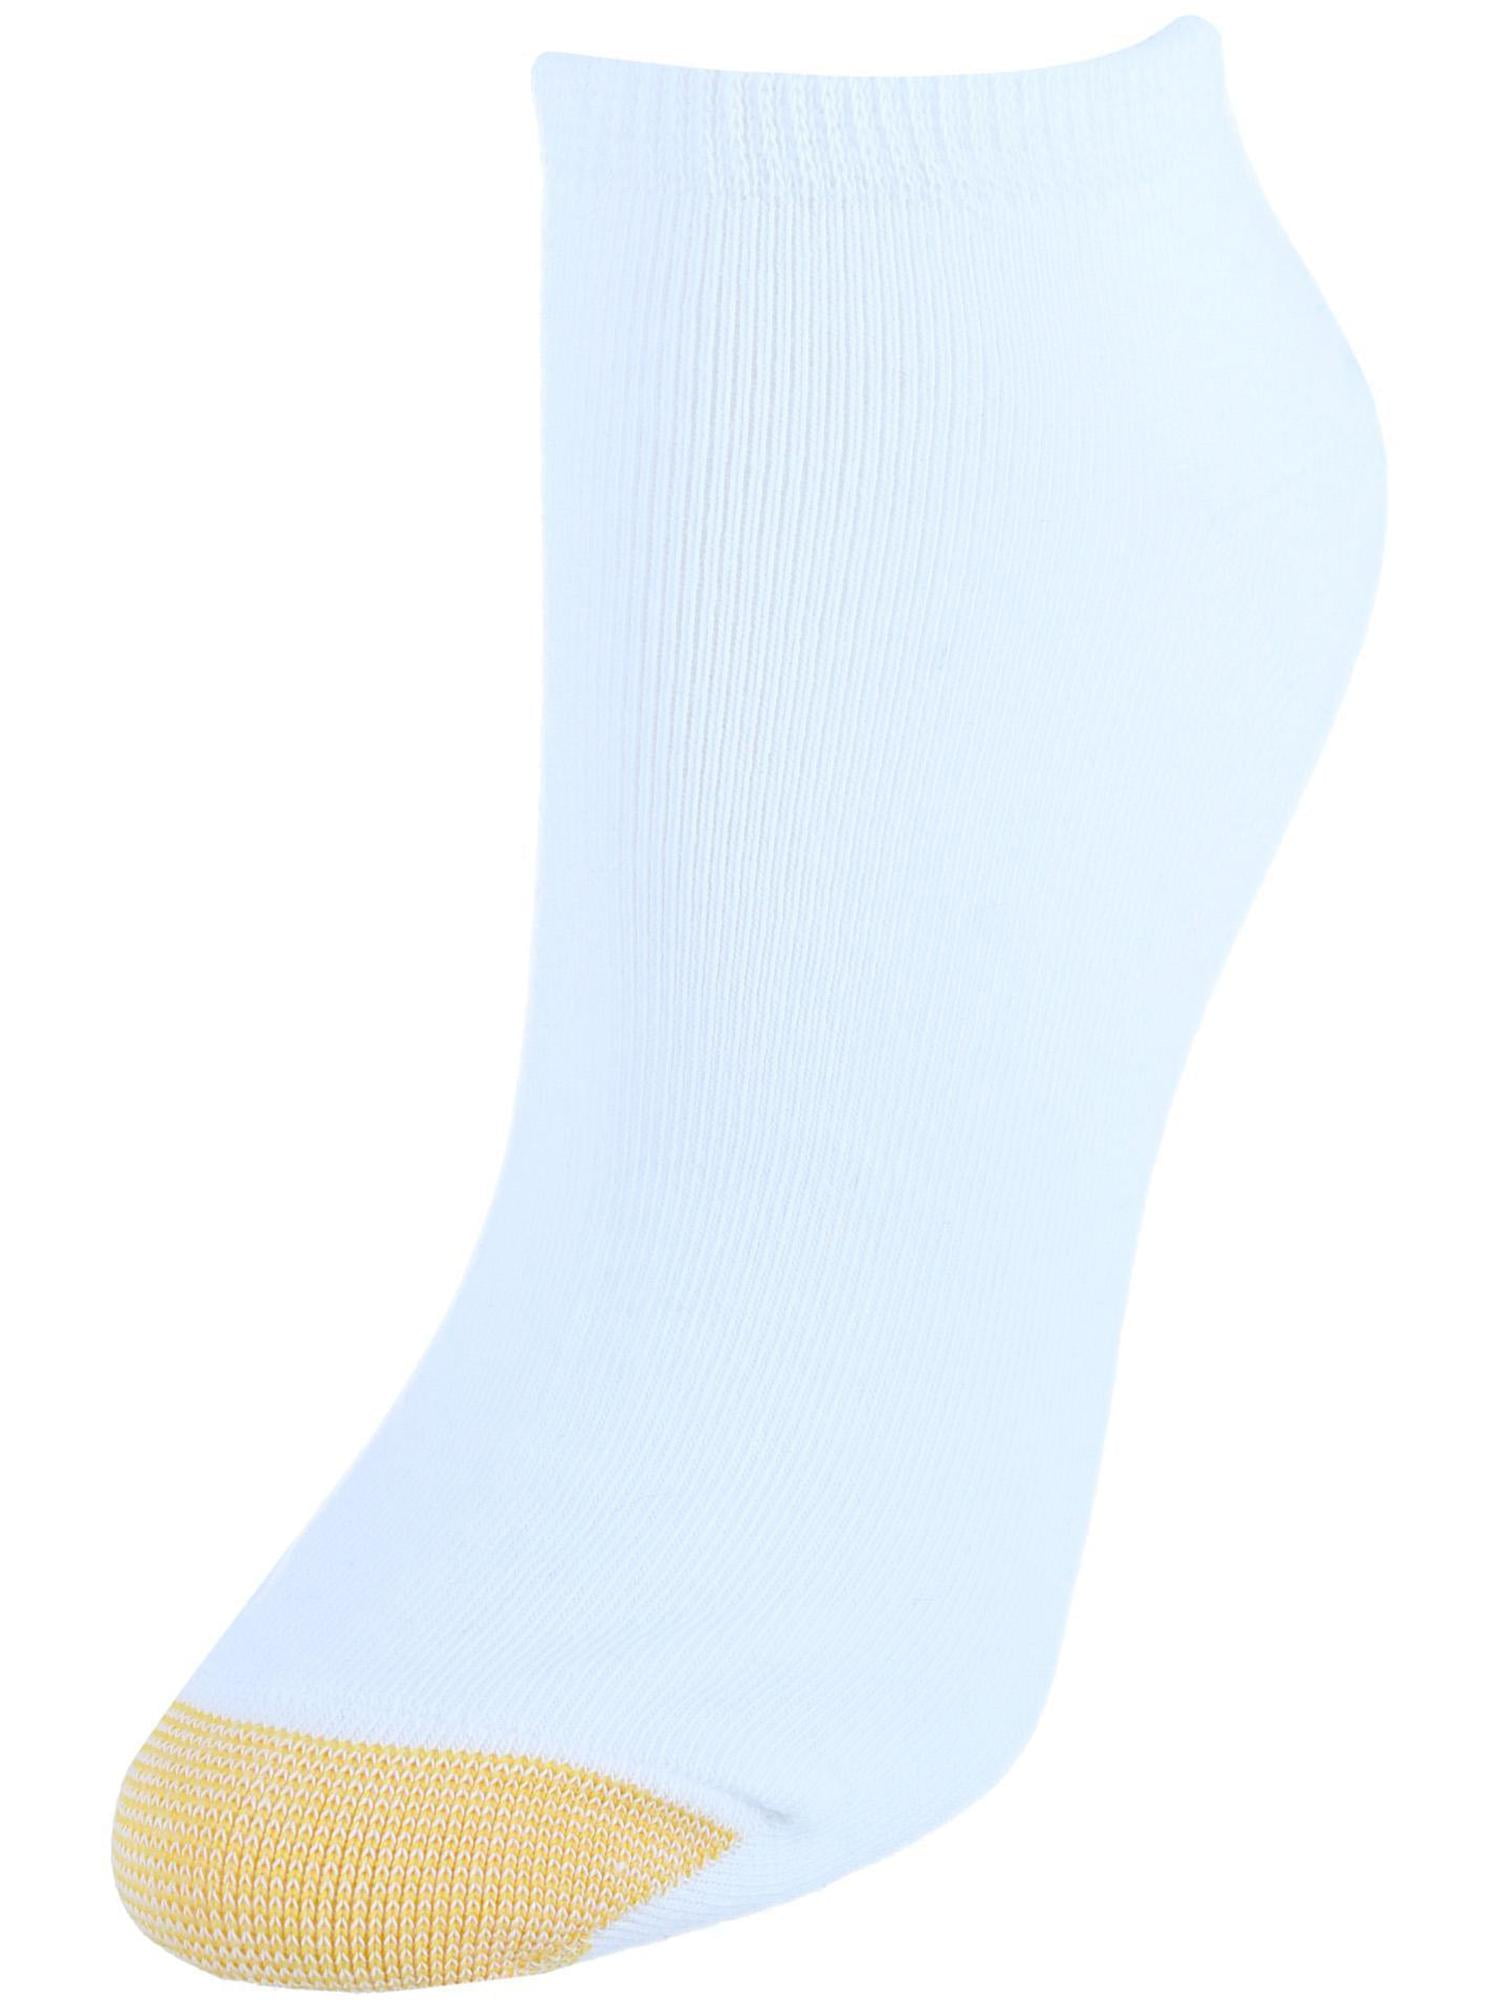 6-pack Women's No-Show Cotton Casual Summer Socks Multi Color Sock 